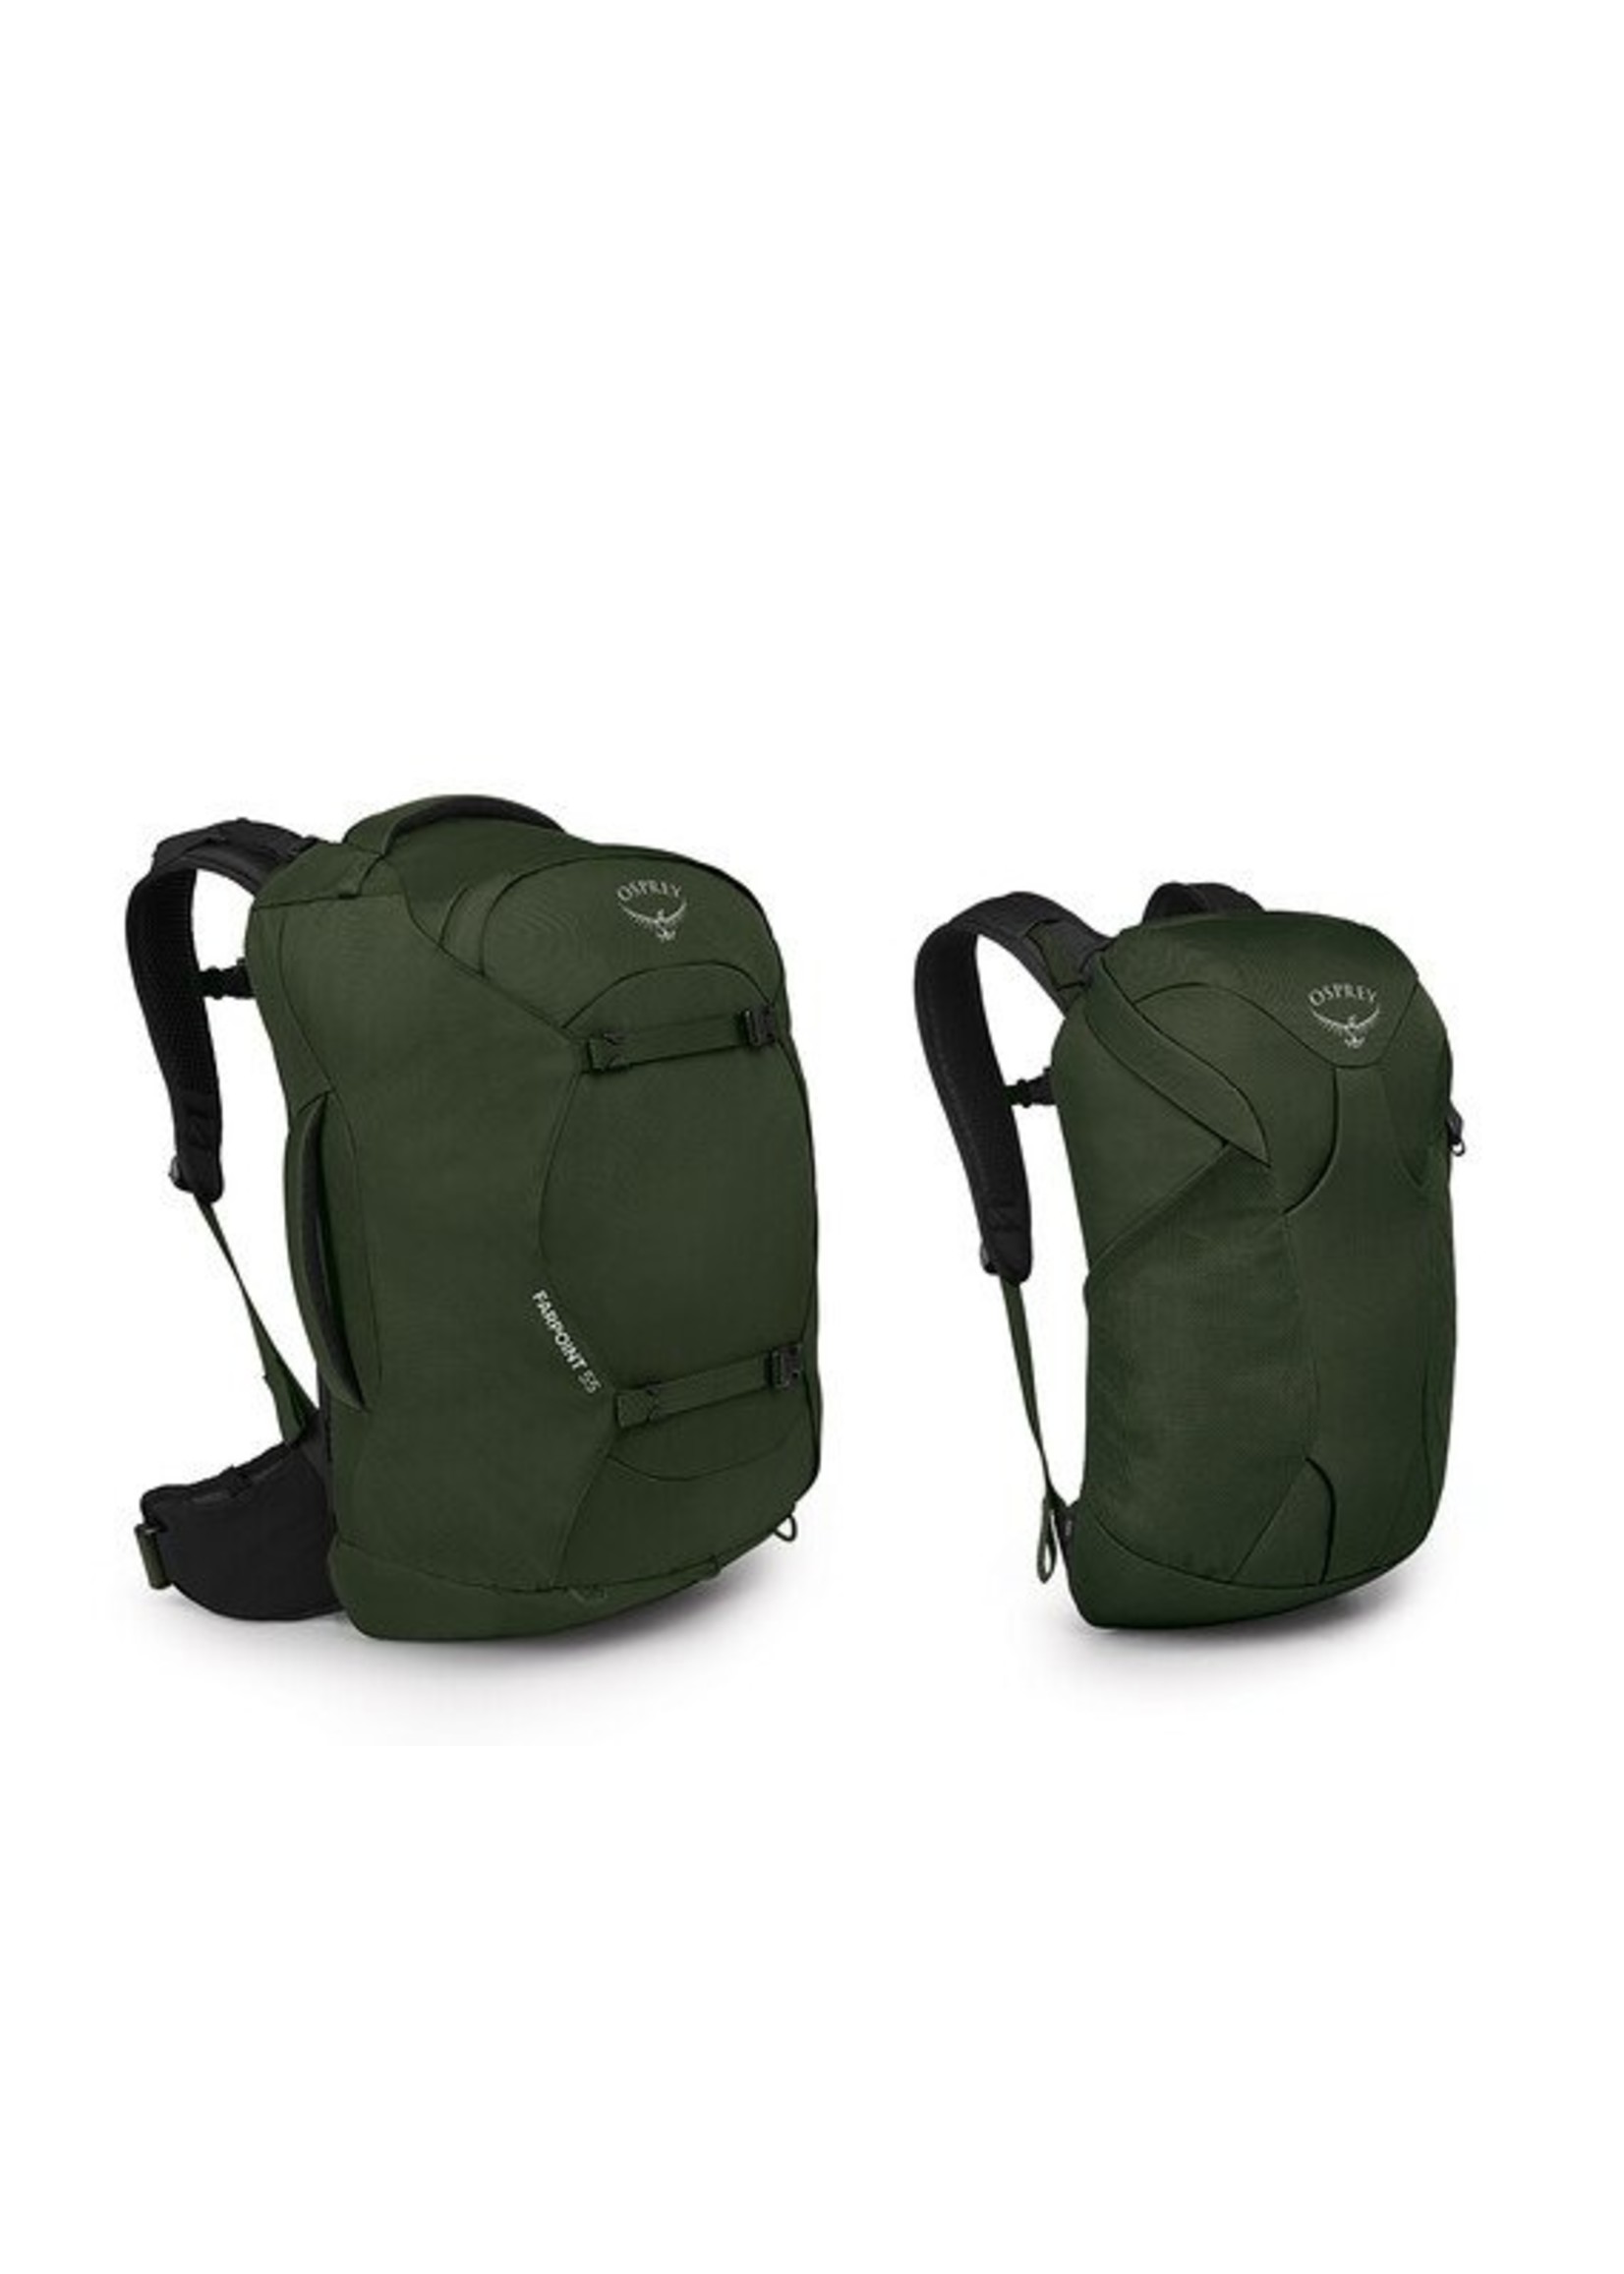 Farpoint® 55 Travel Pack